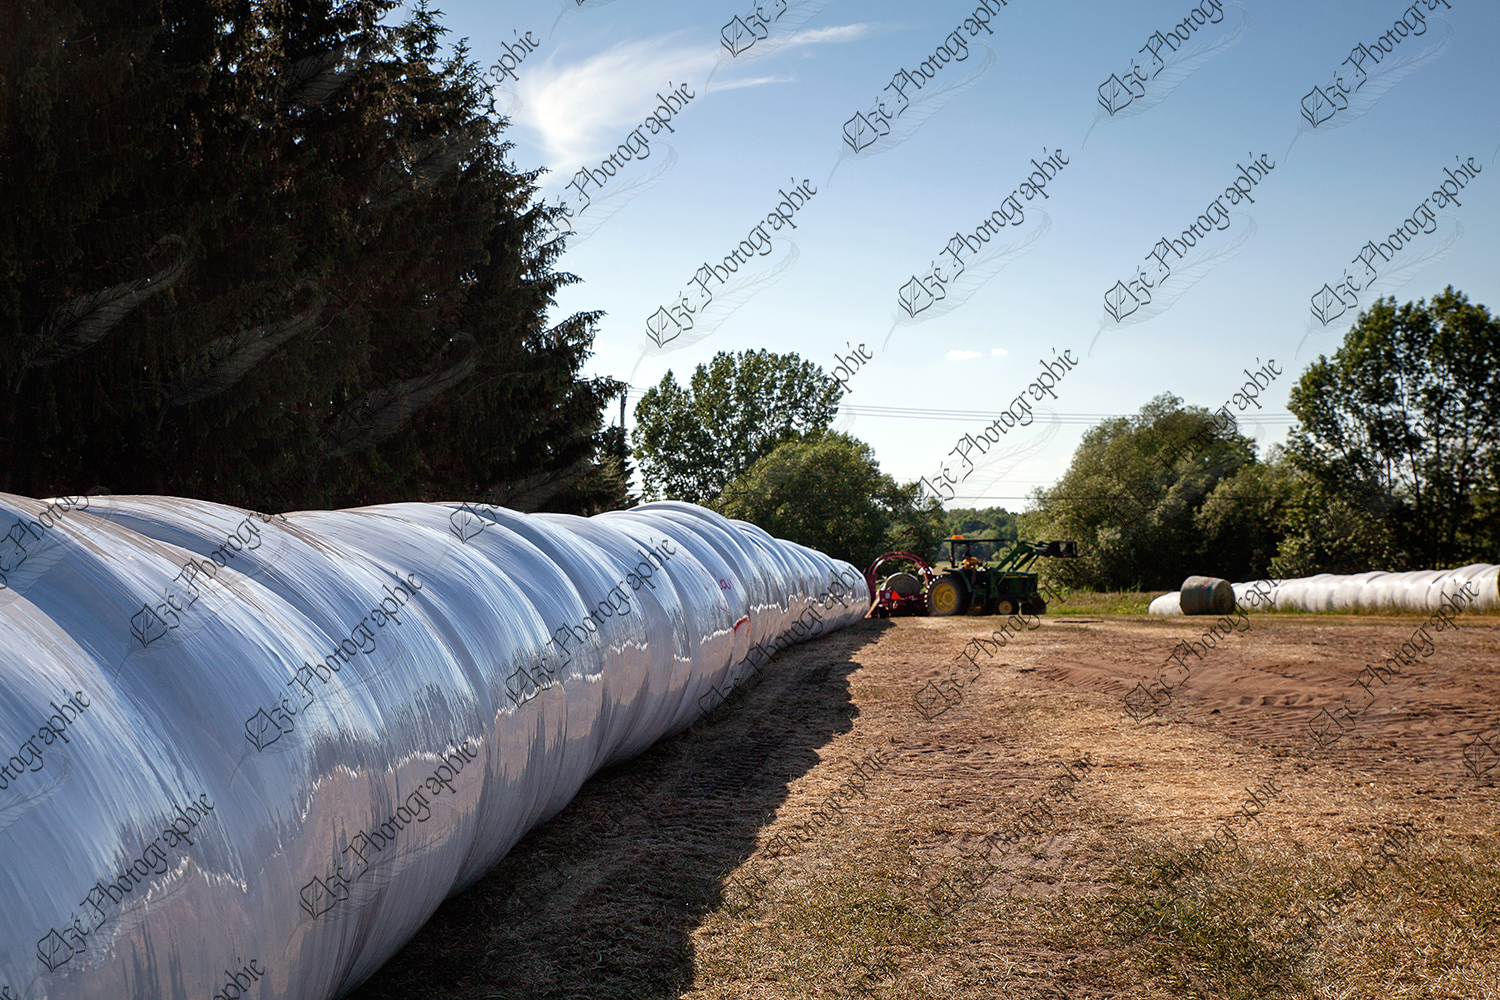 elze_photo_9270_ballot_enrobage_recolte_hay_coating_tractor